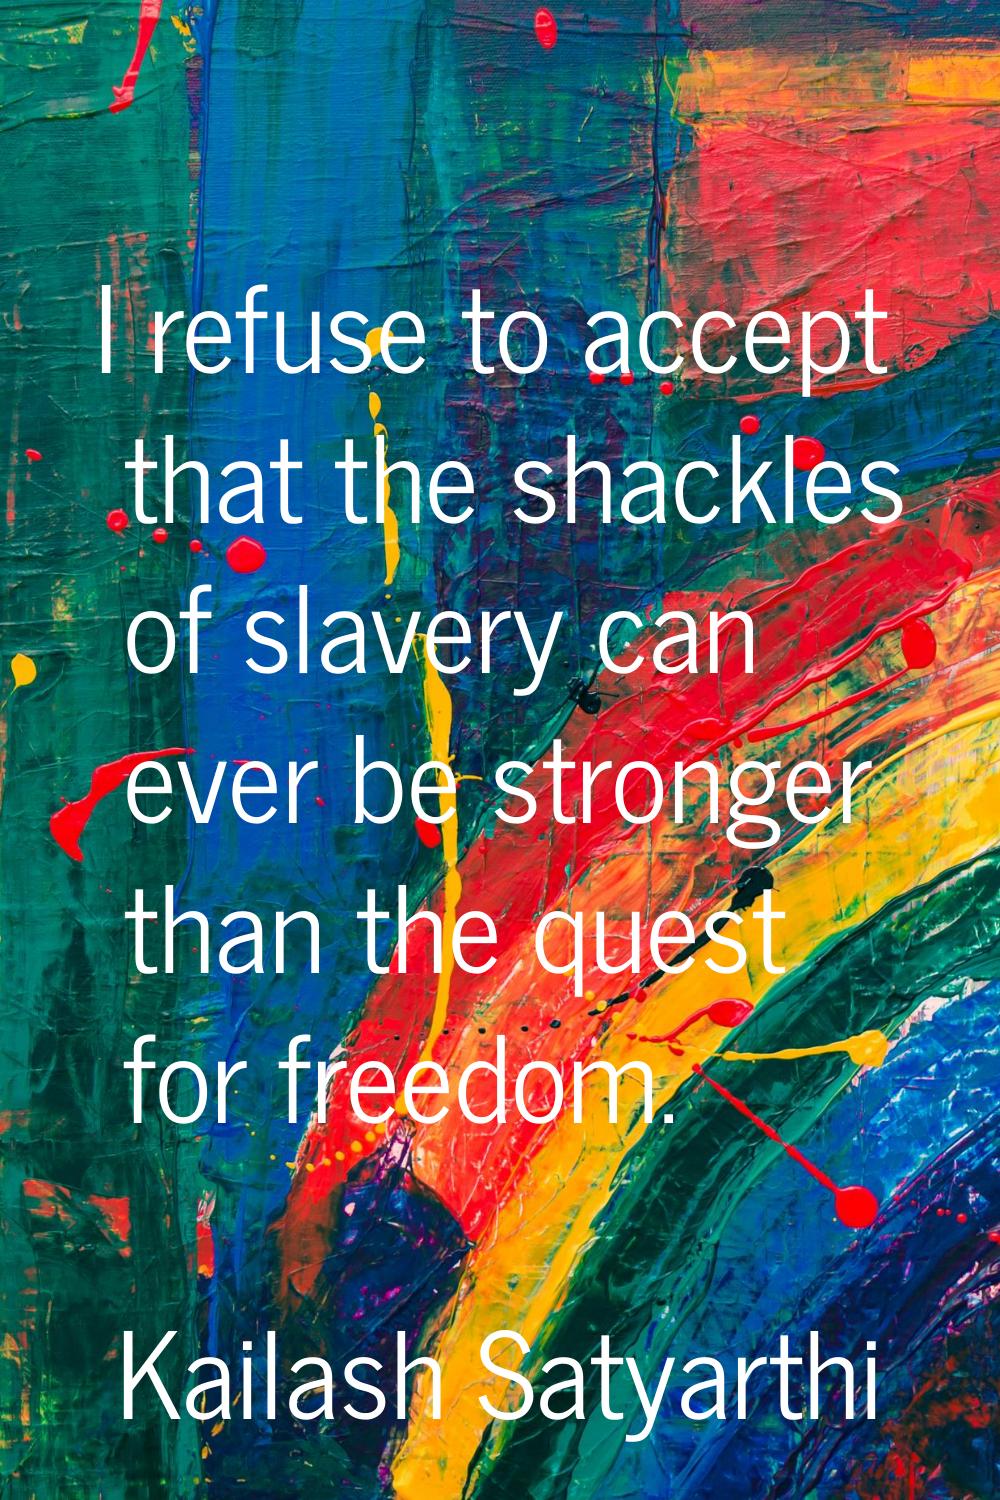 I refuse to accept that the shackles of slavery can ever be stronger than the quest for freedom.